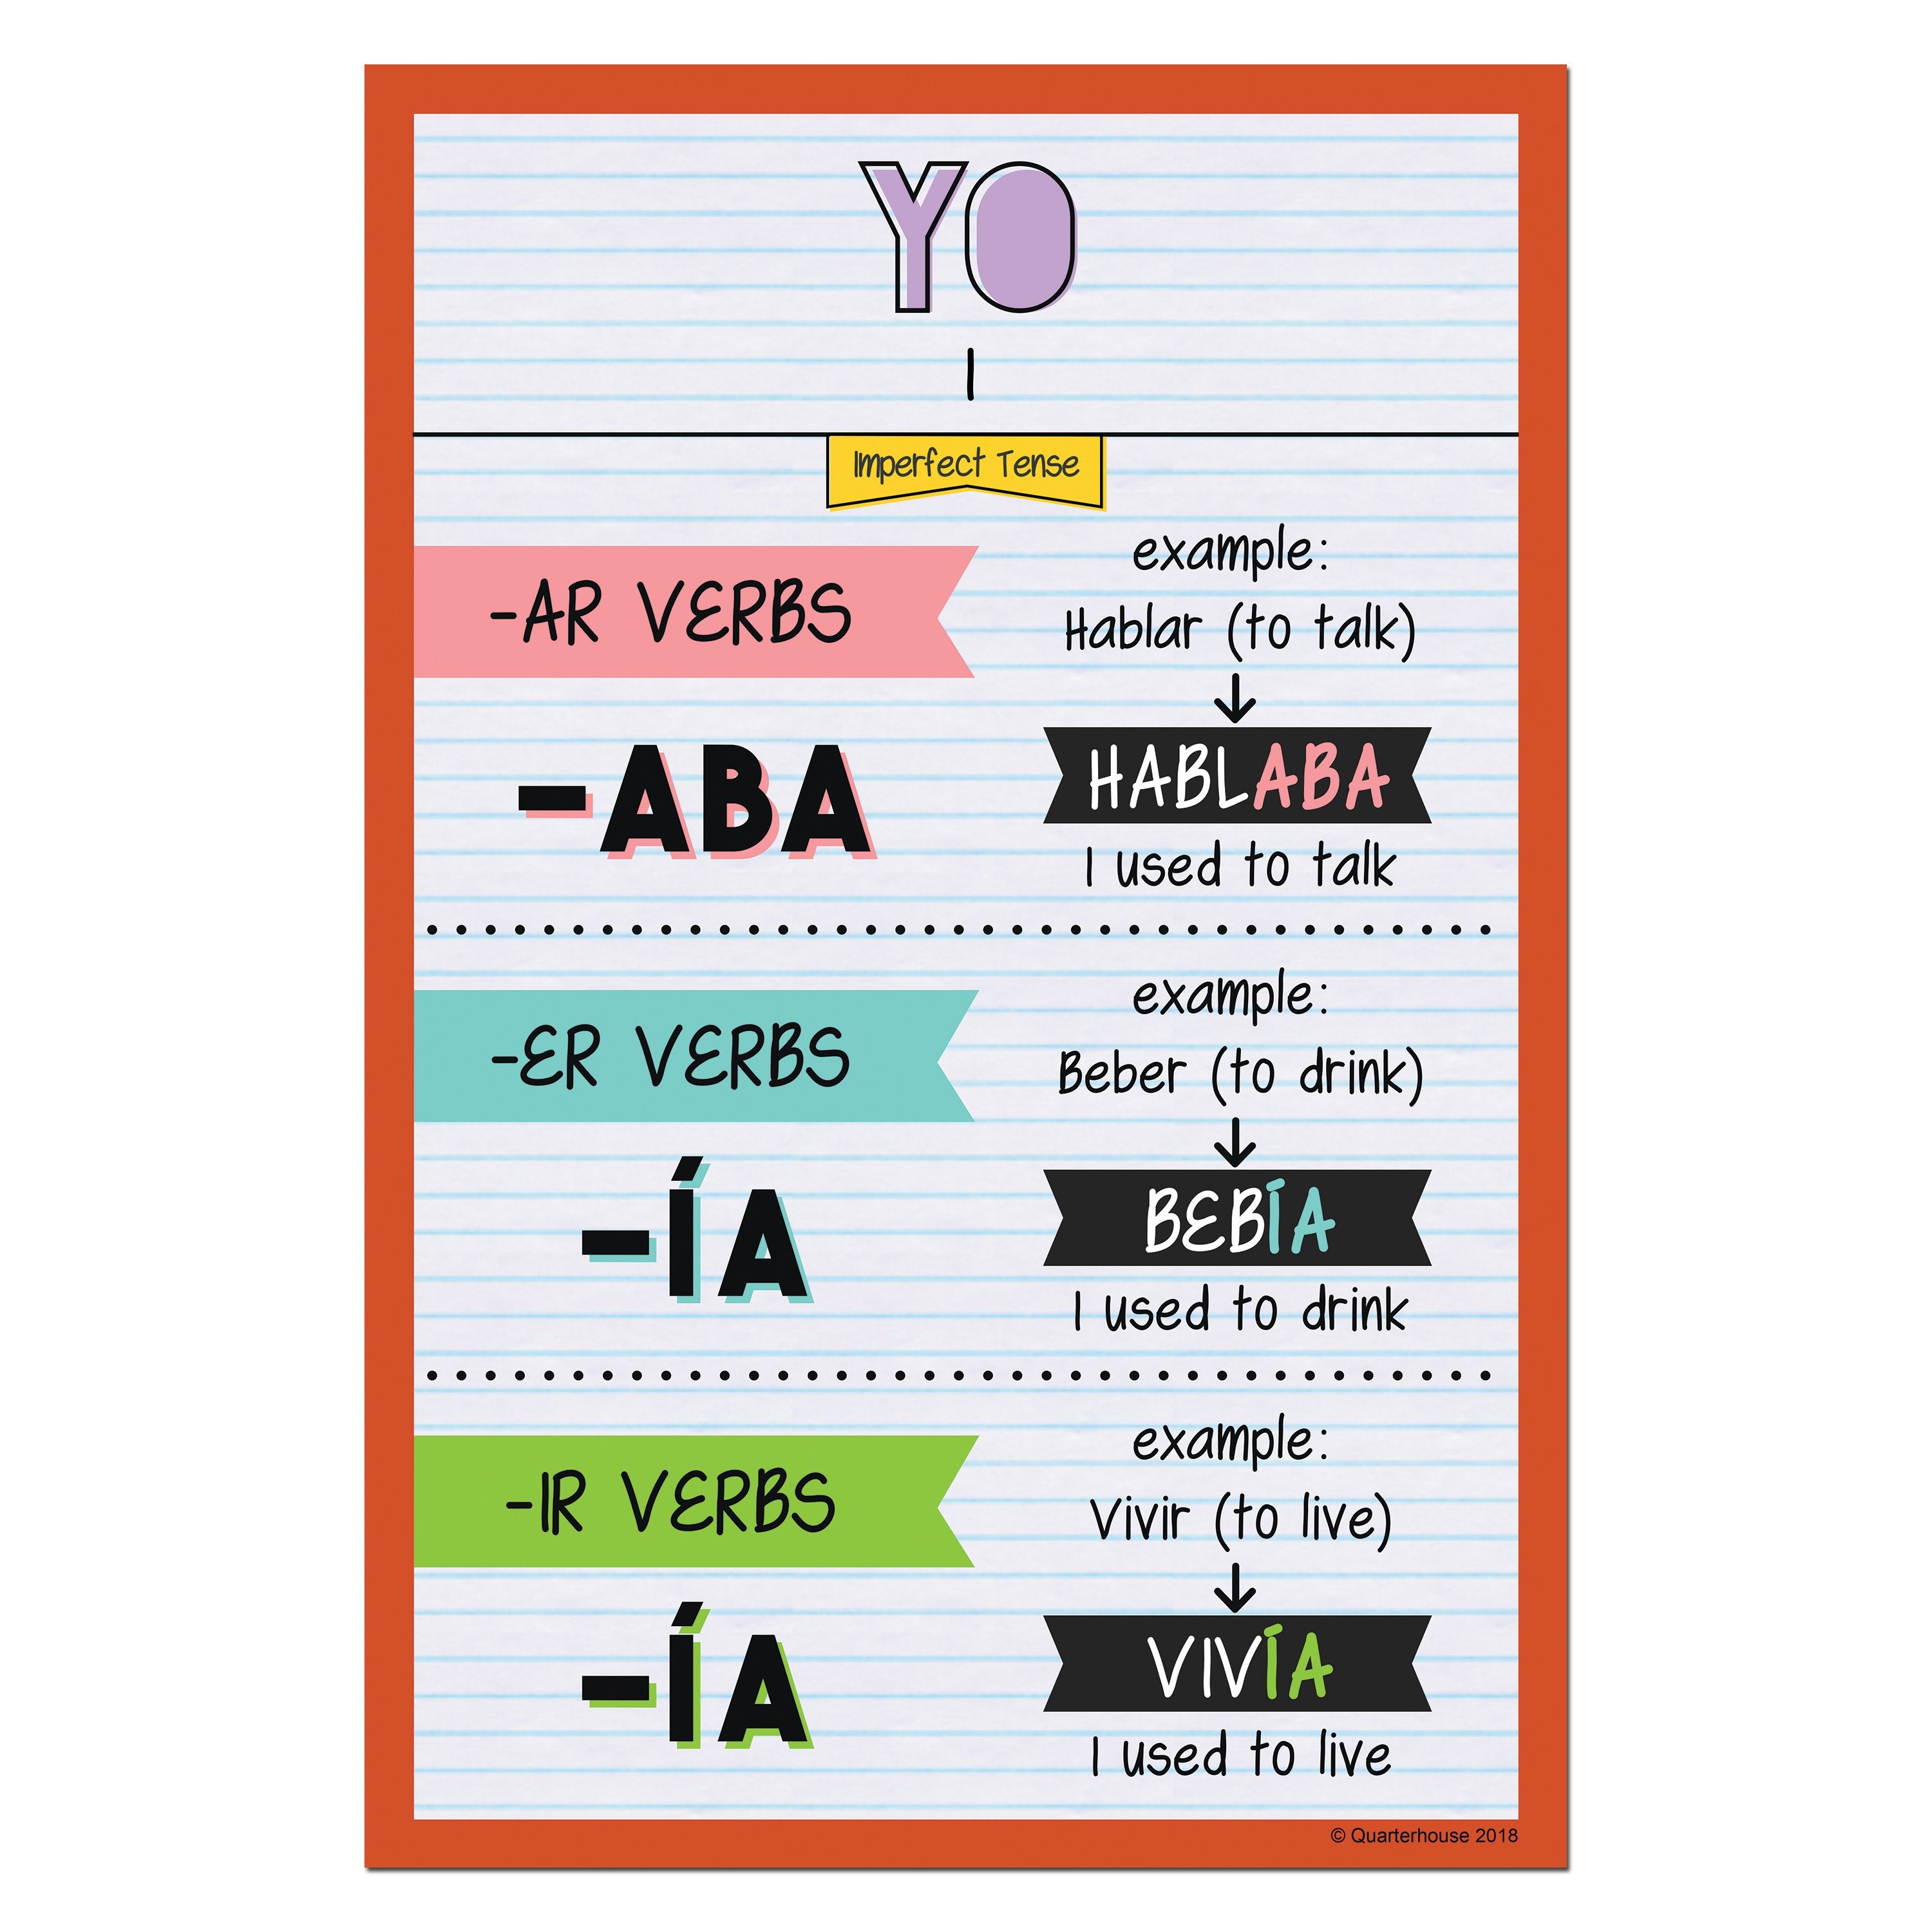 Ir Verbs in Spanish, Conjugation Charts & Uses - Lesson